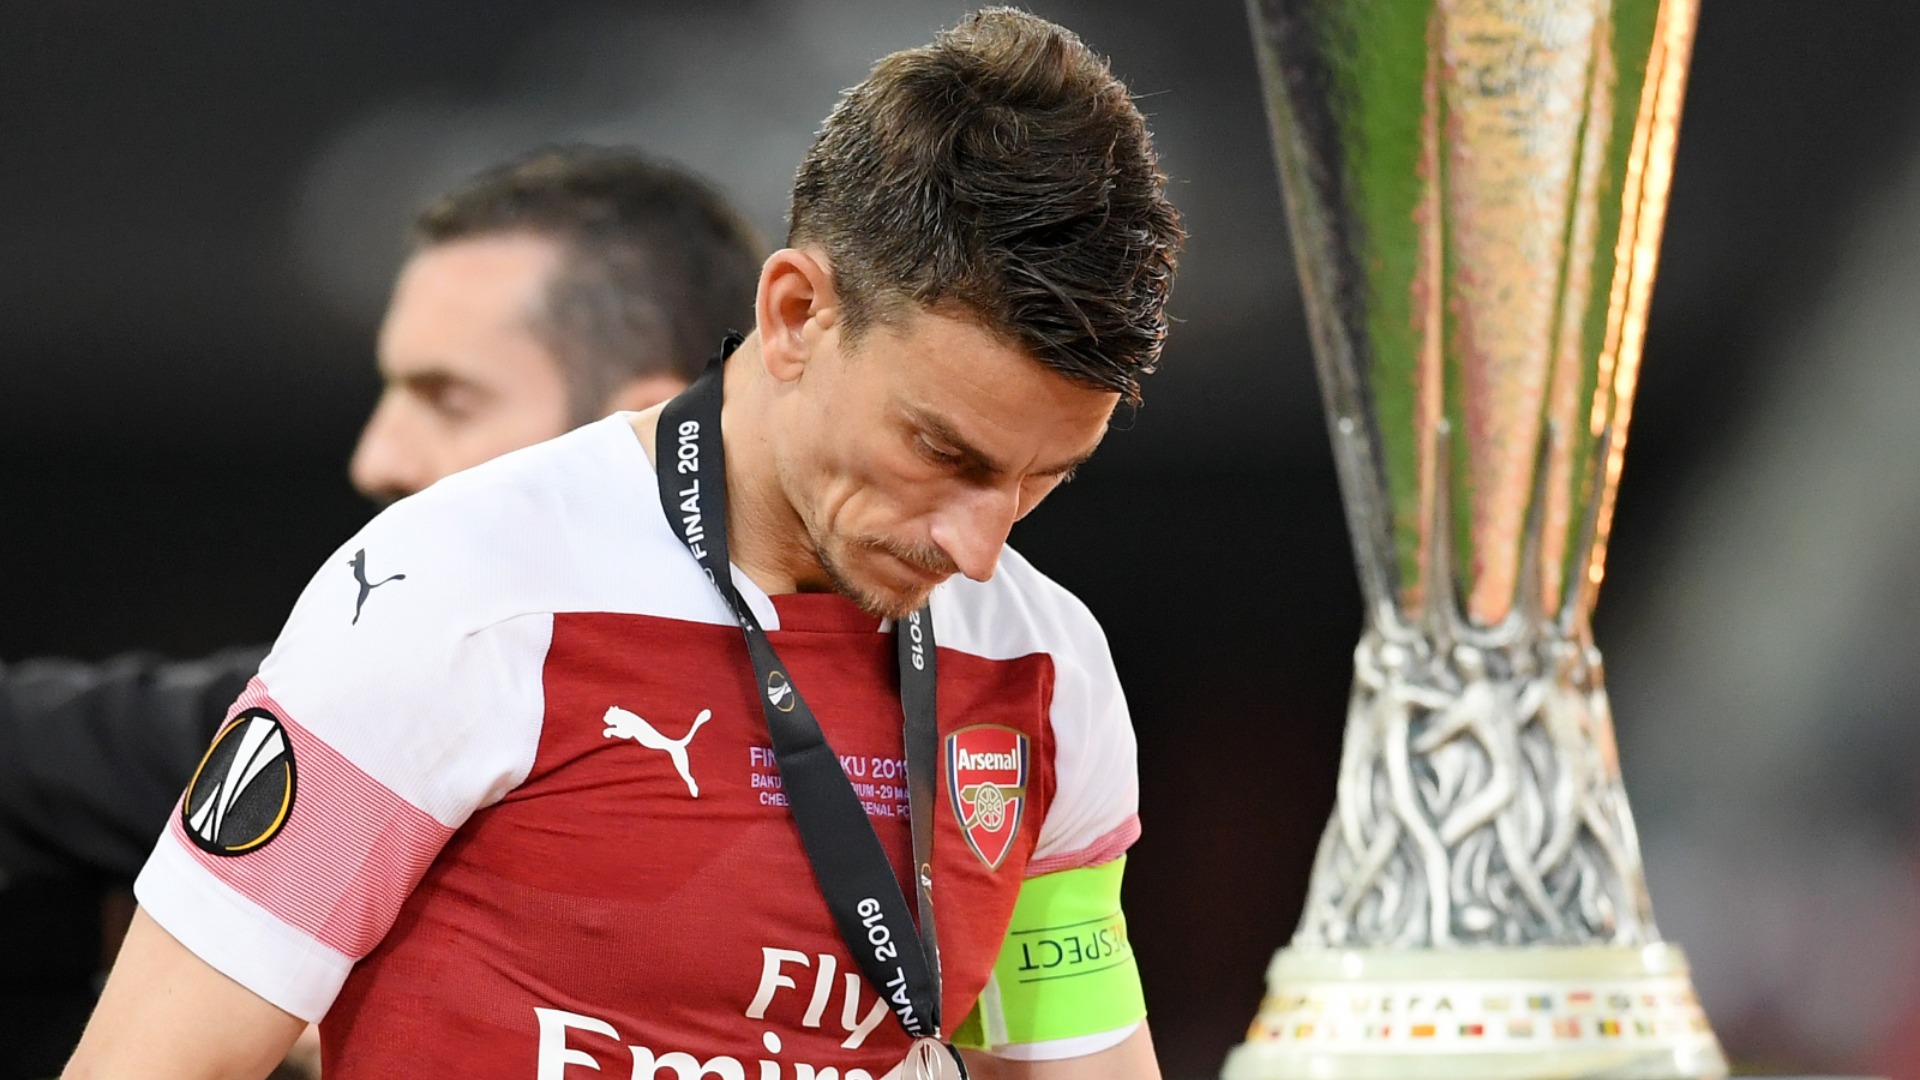 With Arsenal fans unhappy at Laurent Koscielny's move, Ian Wright expressed his anger at the defender's controversial Bordeaux unveiling.